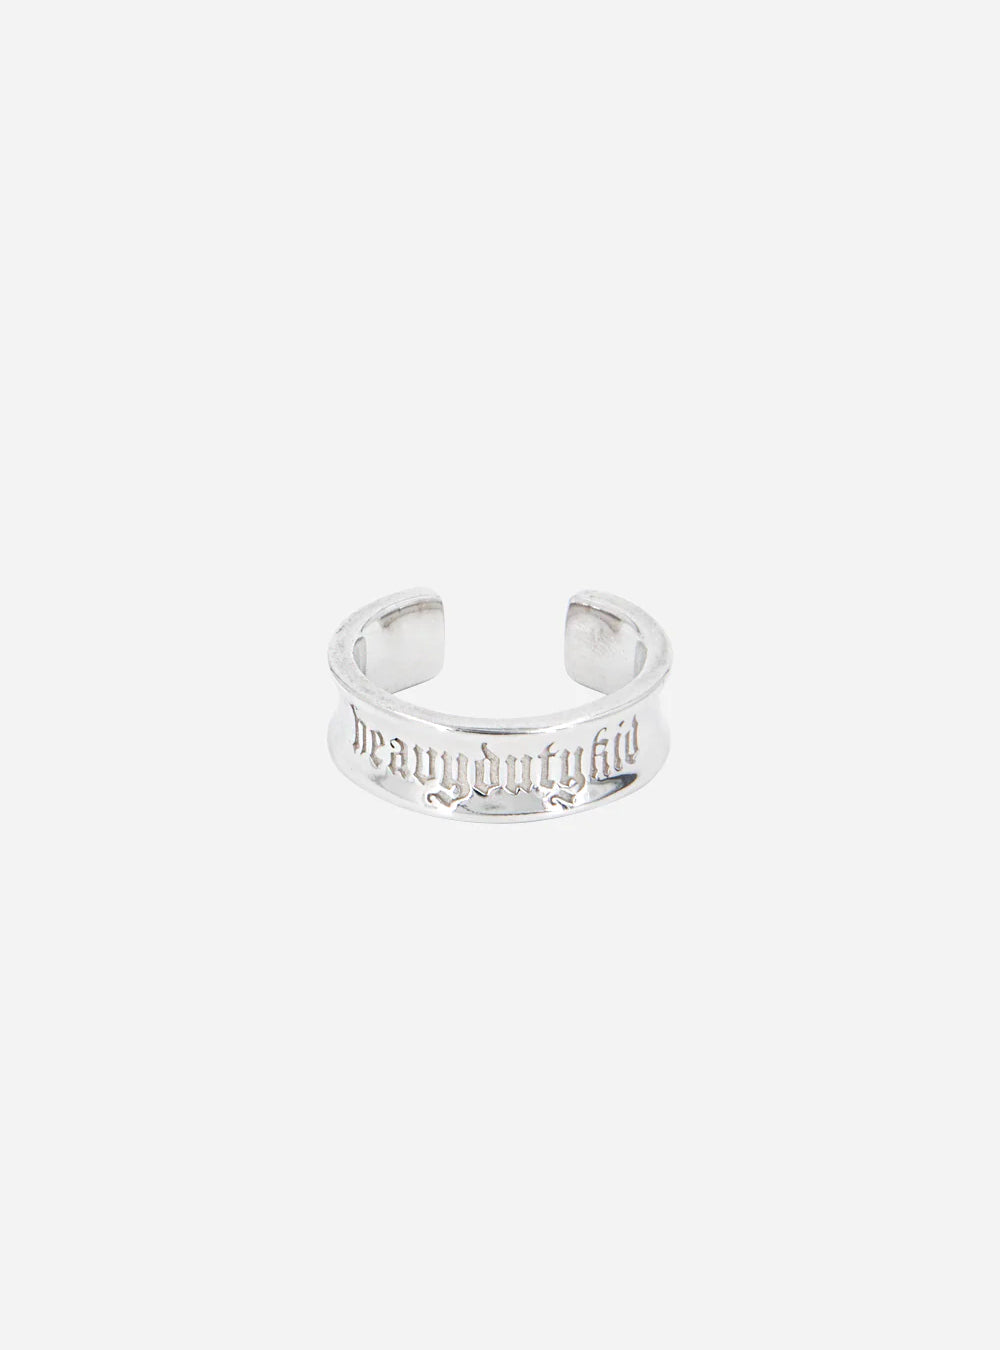 a HEAVYDUTYKID ring with a row of diamonds from MIDNIGHTFACTORY.